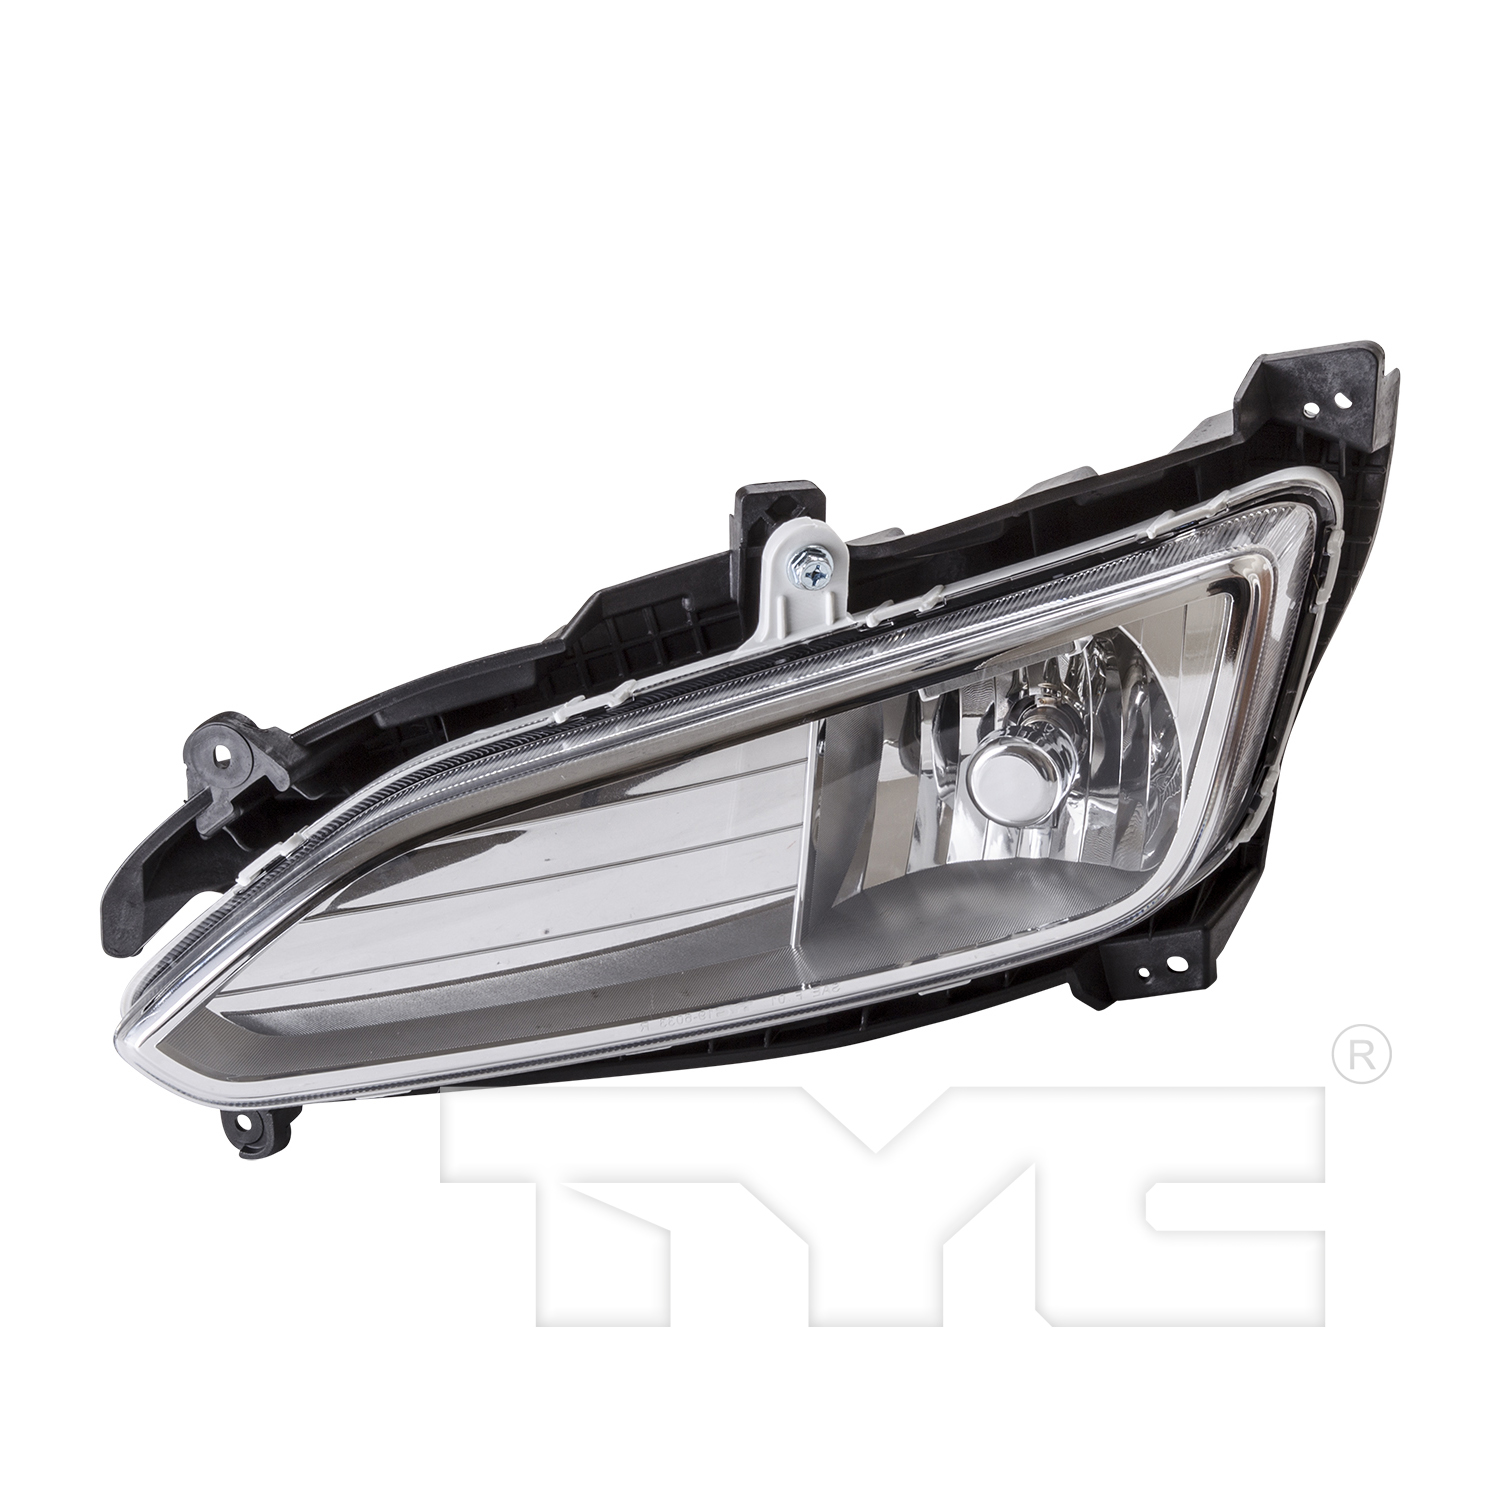 Partslink Number HY2592141 OE Replacement Fog Light Assembly HYUNDAI SANTA FE SPORT 